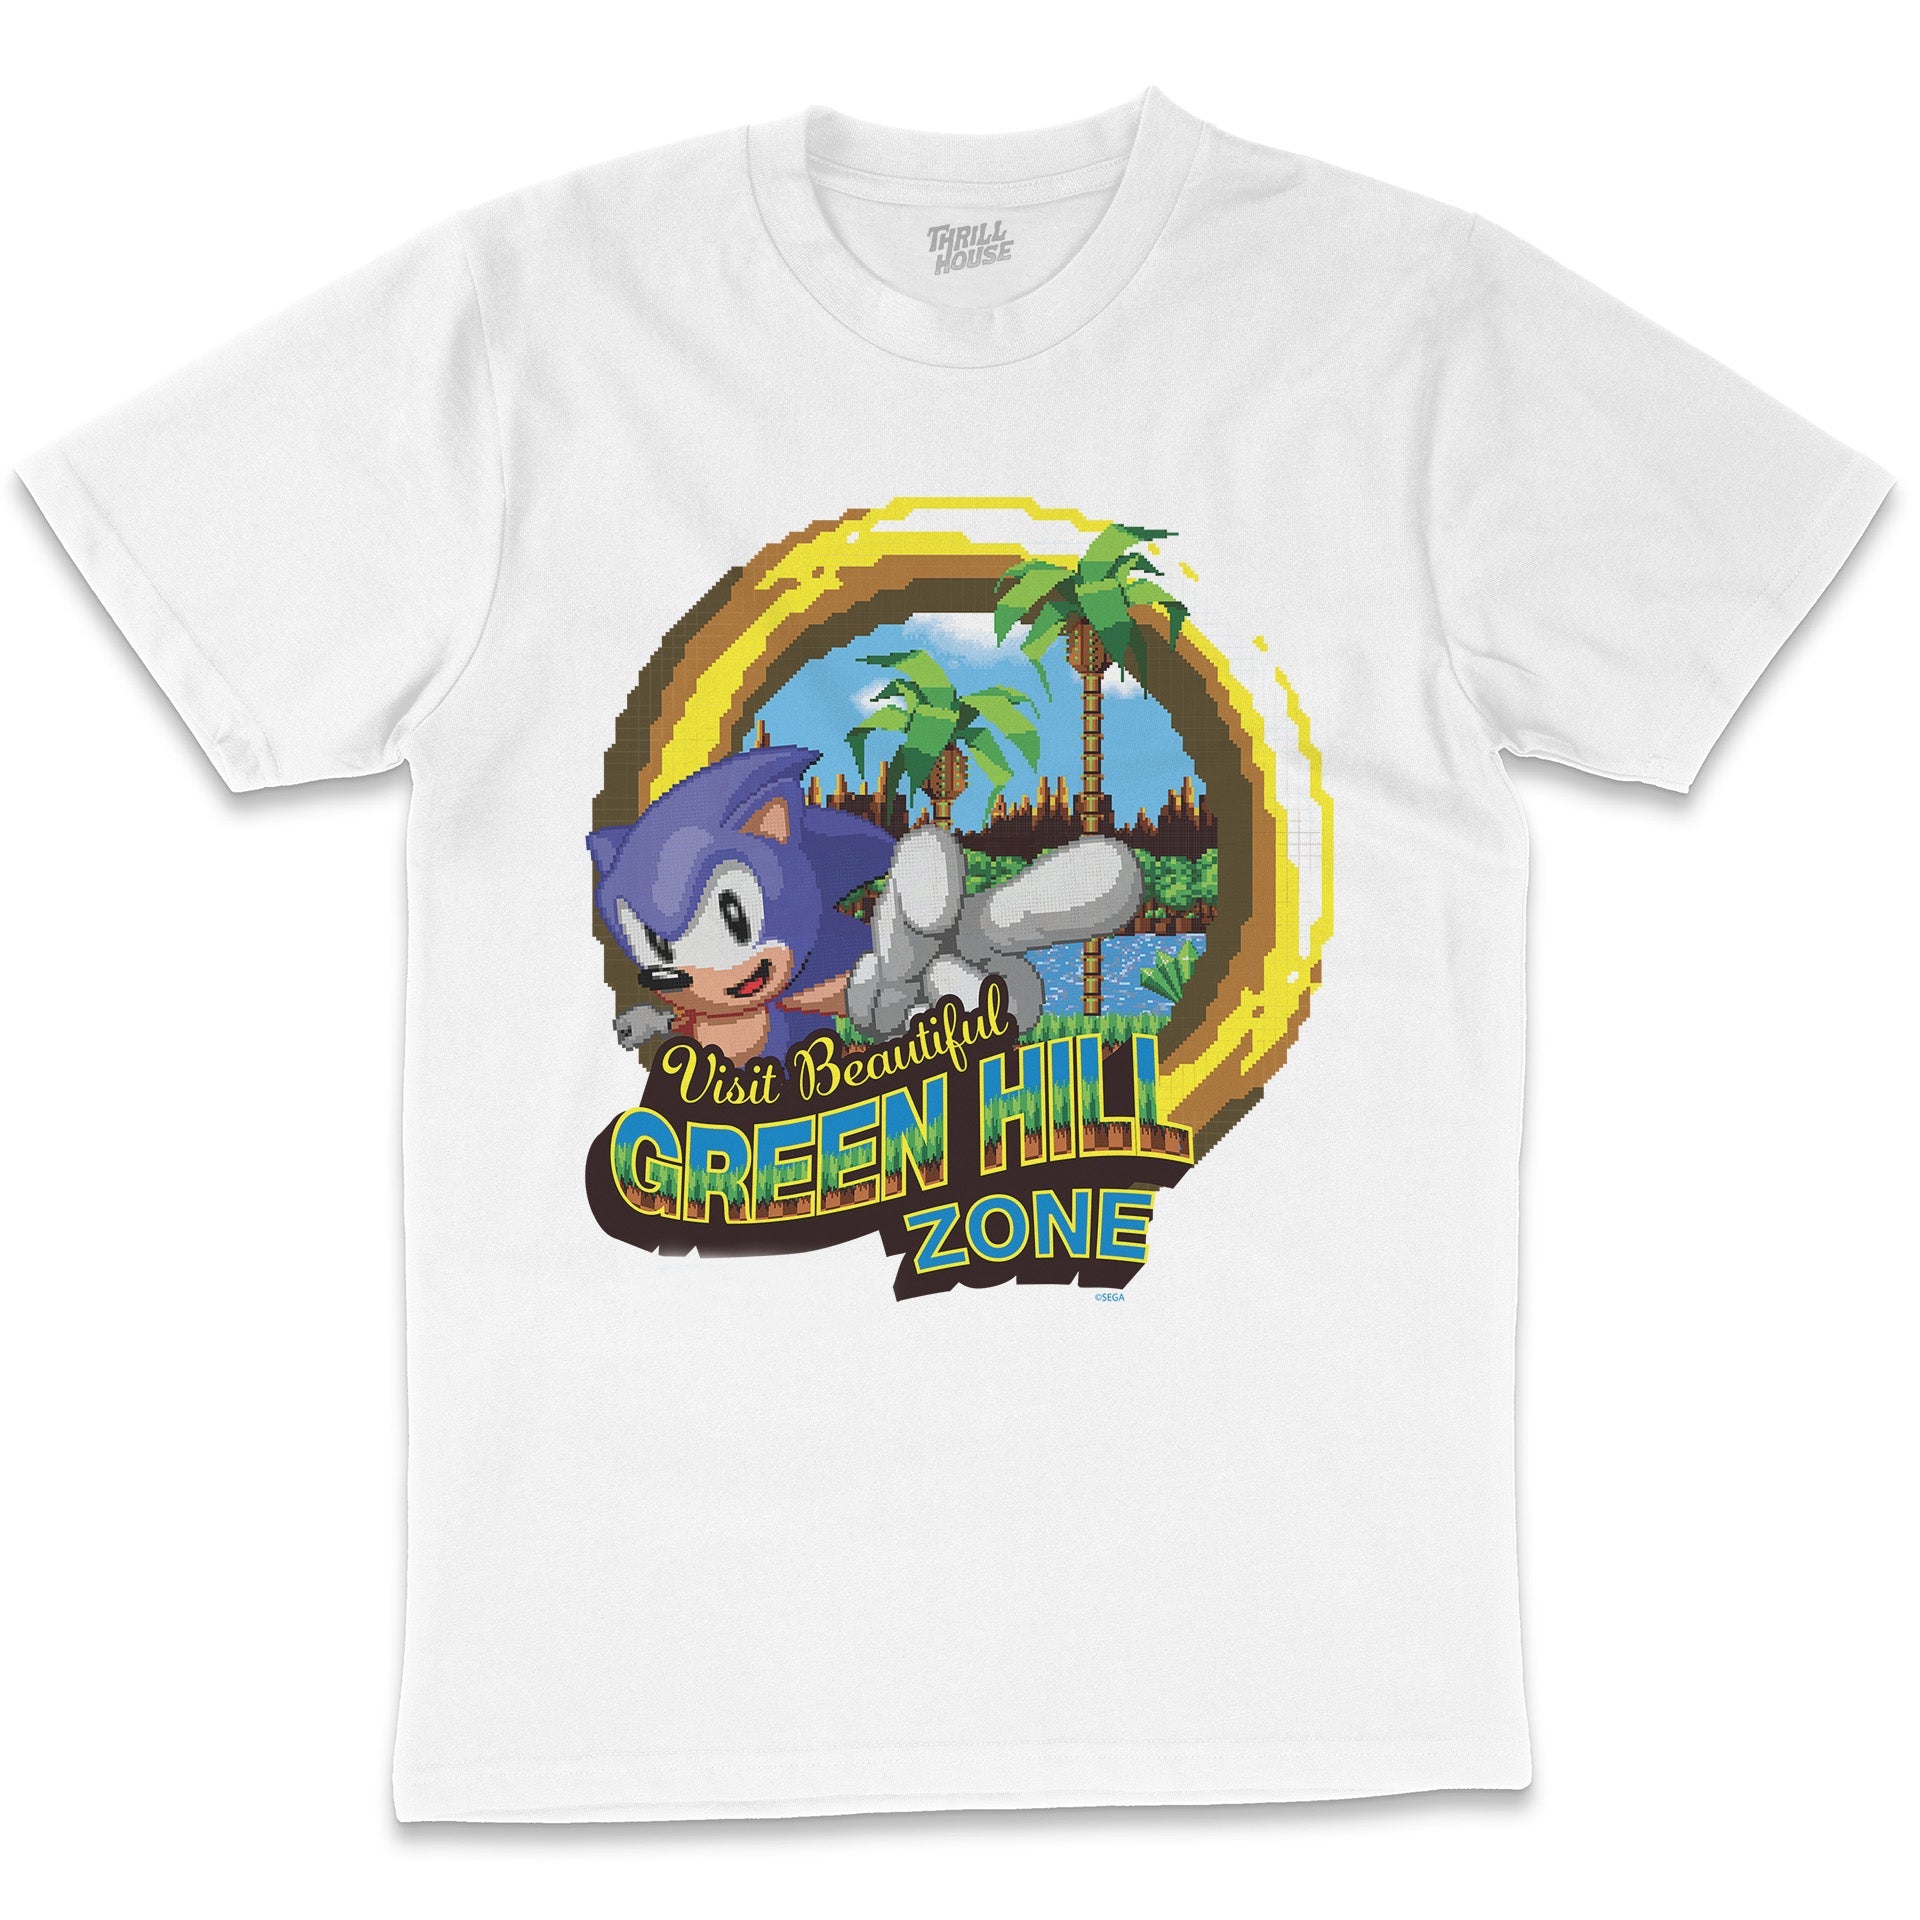 Sonic The Hedgehog 90s Console Game Green Hill Zone SEGA Officially Licensed Cotton T-Shirt